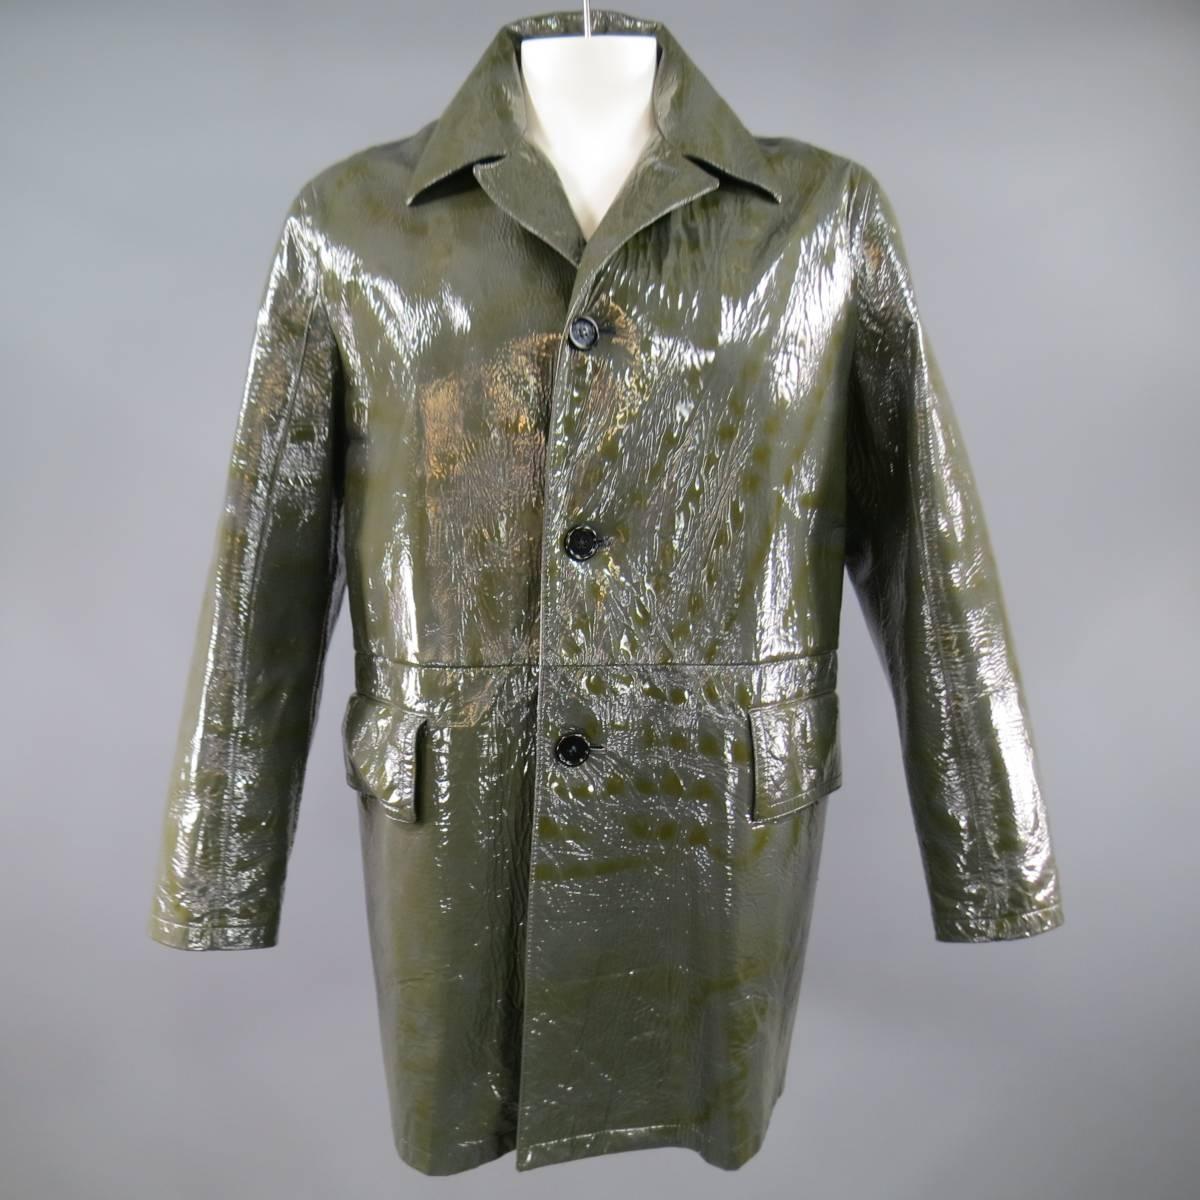 This rare PRADA classic menswear design with a twist coat comes in a glossy, high shine patent, wrinkle textured charcoal and olive green coated canvas material and features a pointed collar, four button closure, frontal flap pockets, and detachable